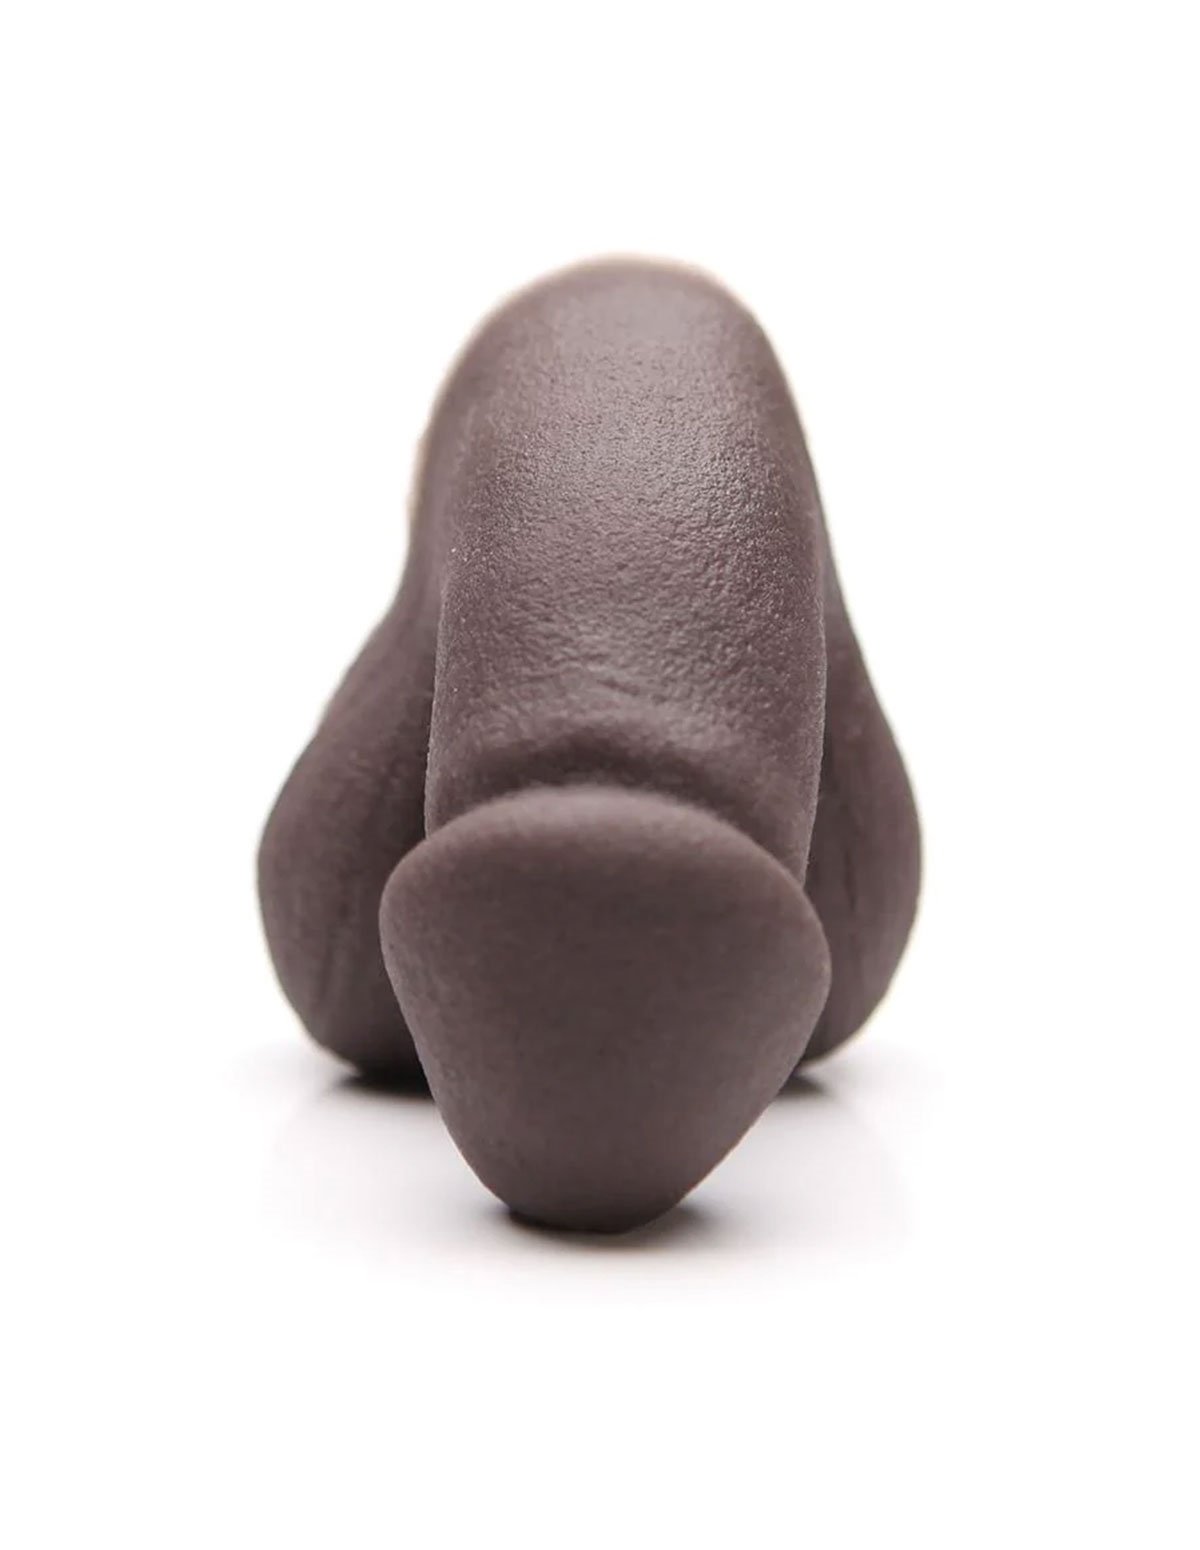 alternate image for Tantus On The Go Dark Packer - Super Soft Silicone